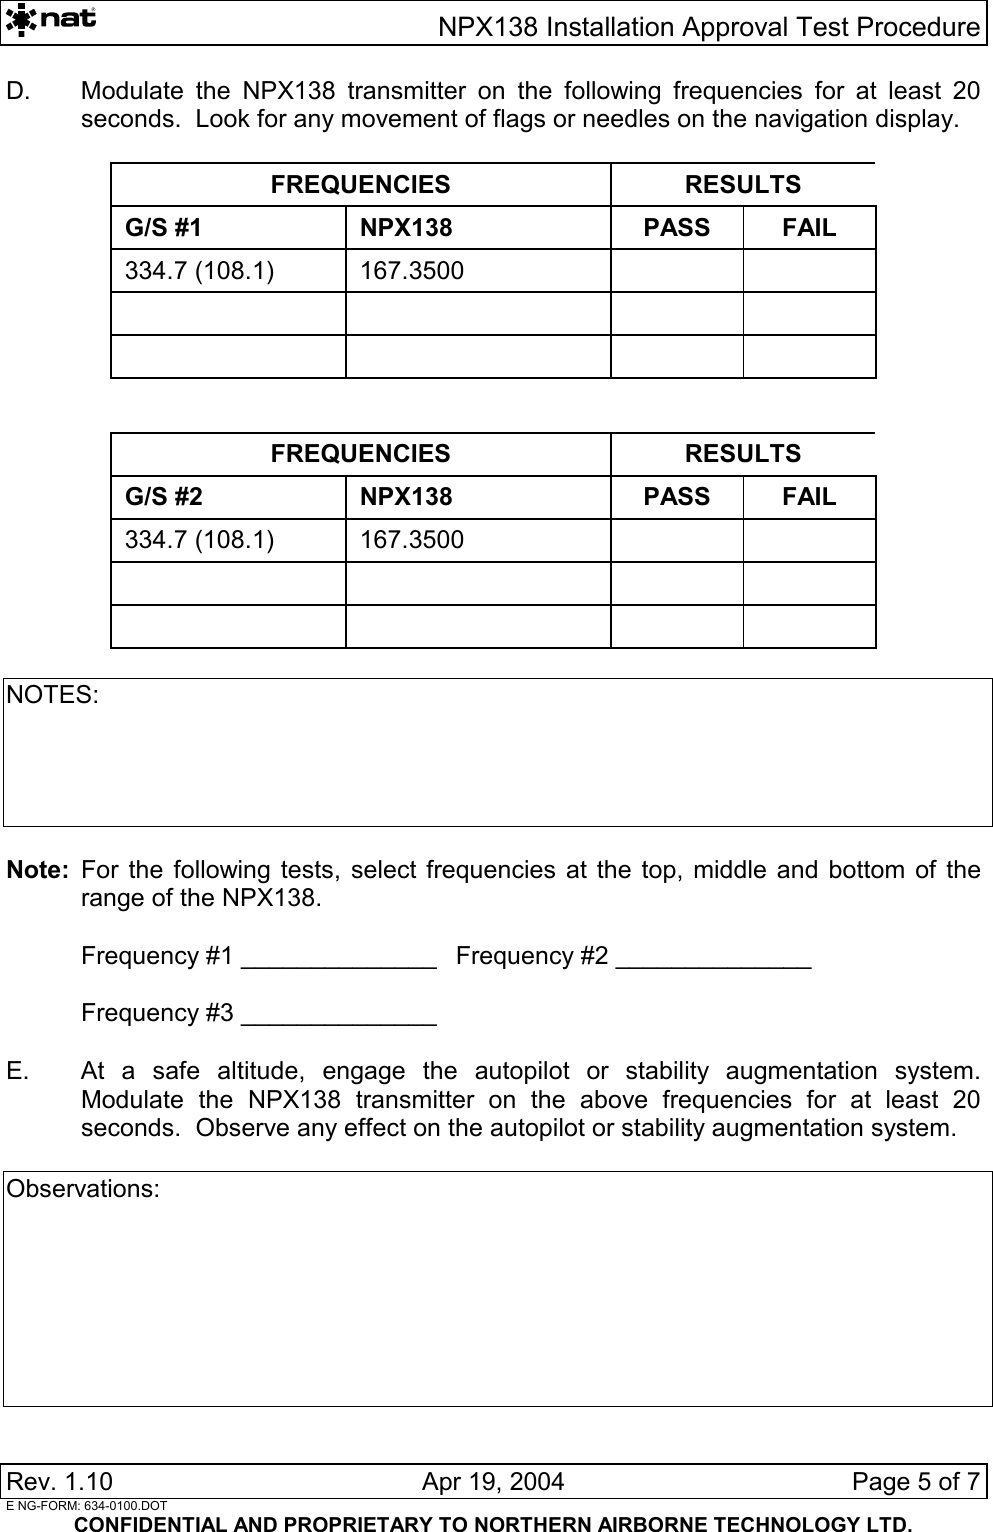   NPX138 Installation Approval Test Procedure Rev. 1.10   Apr 19, 2004  Page 5 of 7  E NG-FORM: 634-0100.DOT CONFIDENTIAL AND PROPRIETARY TO NORTHERN AIRBORNE TECHNOLOGY LTD. D.  Modulate the NPX138 transmitter on the following frequencies for at least 20 seconds.  Look for any movement of flags or needles on the navigation display.  FREQUENCIES RESULTS G/S #1 NPX138 PASS FAIL 334.7 (108.1)  167.3500                 FREQUENCIES RESULTS G/S #2 NPX138 PASS FAIL 334.7 (108.1)  167.3500                NOTES:      Note:  For the following tests, select frequencies at the top, middle and bottom of the range of the NPX138.    Frequency #1 ______________  Frequency #2 ______________    Frequency #3 ______________  E.  At a safe altitude, engage the autopilot or stability augmentation system.  Modulate the NPX138 transmitter on the above frequencies for at least 20 seconds.  Observe any effect on the autopilot or stability augmentation system.  Observations:        